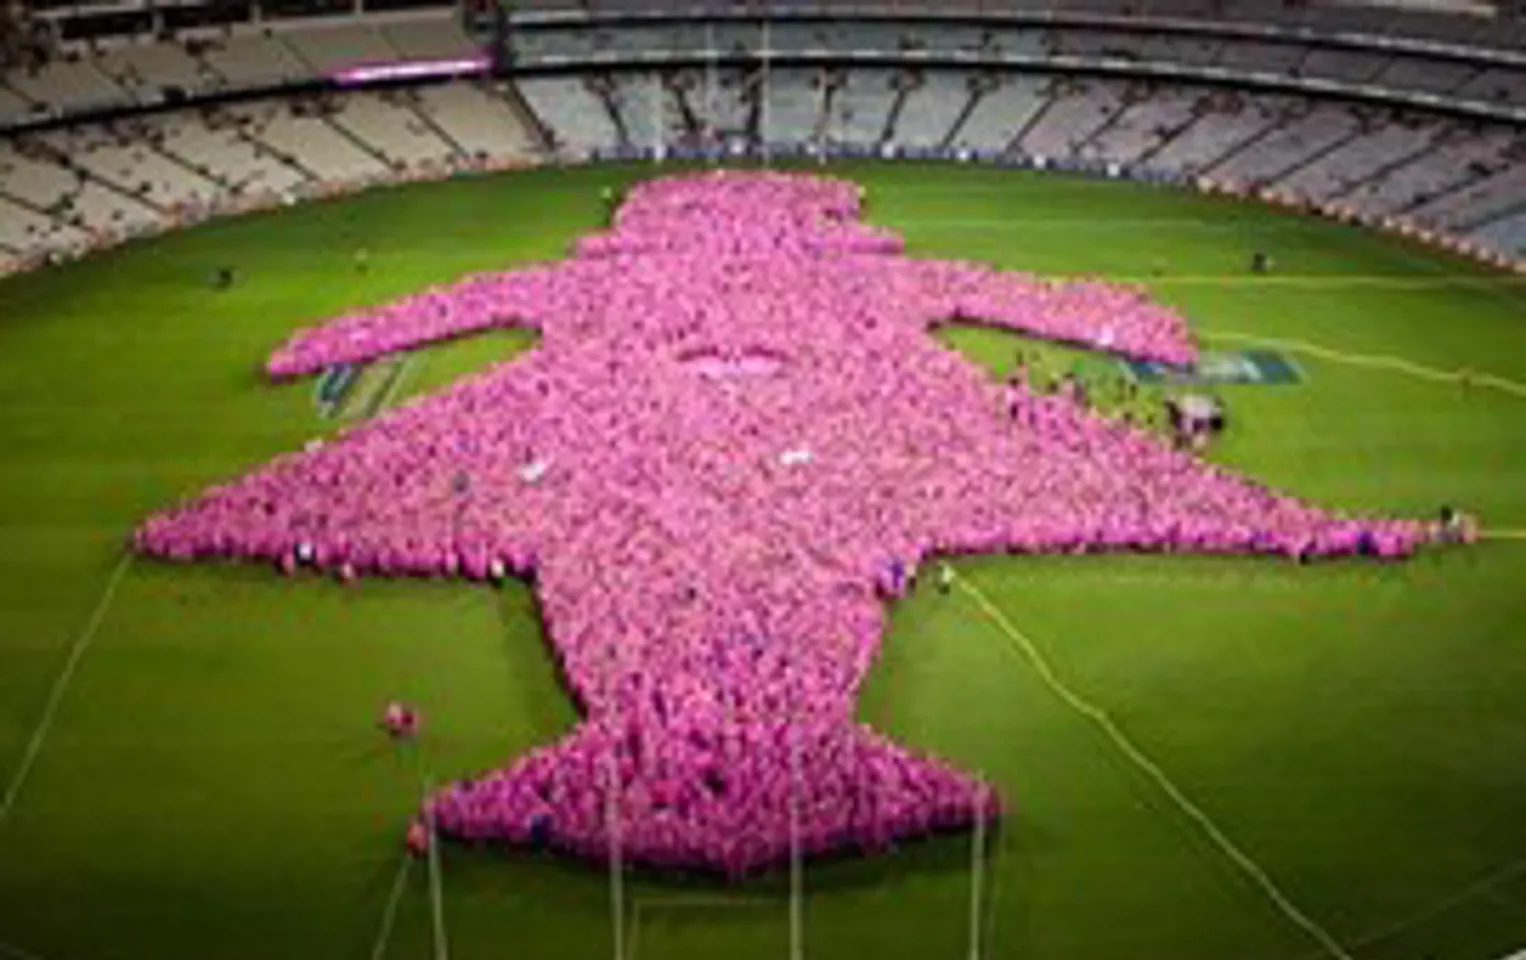 Photo of the 2005 'Field of Women' event - an aerial photo shows people making up the Pink Lady shape on the green grass of the MCG